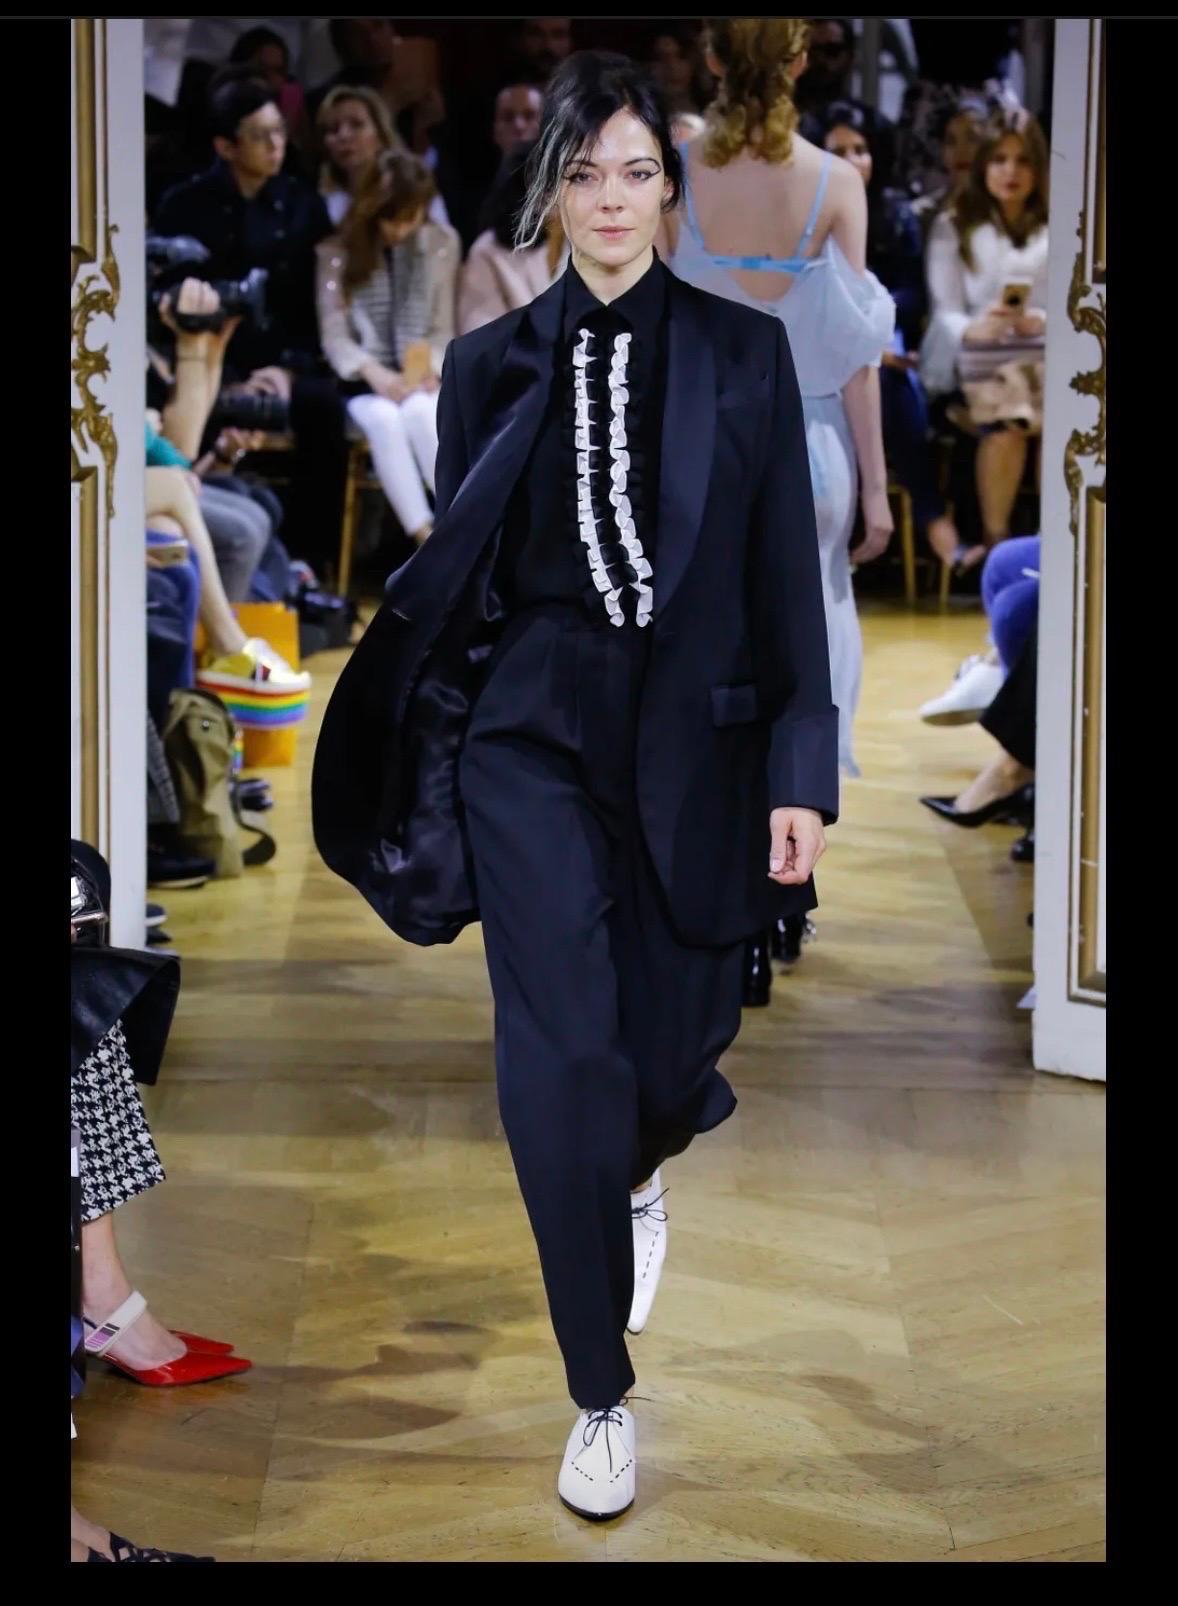 John Galliano blazer with a masculine allure , from the fall 2018 catwalk.
Long and straight with a tuxedo shawl collar , closes with a single button.
2 flap pockets and pretty buttoned lapel cuffs.
Slit back.
In black virgin wool with acetate and